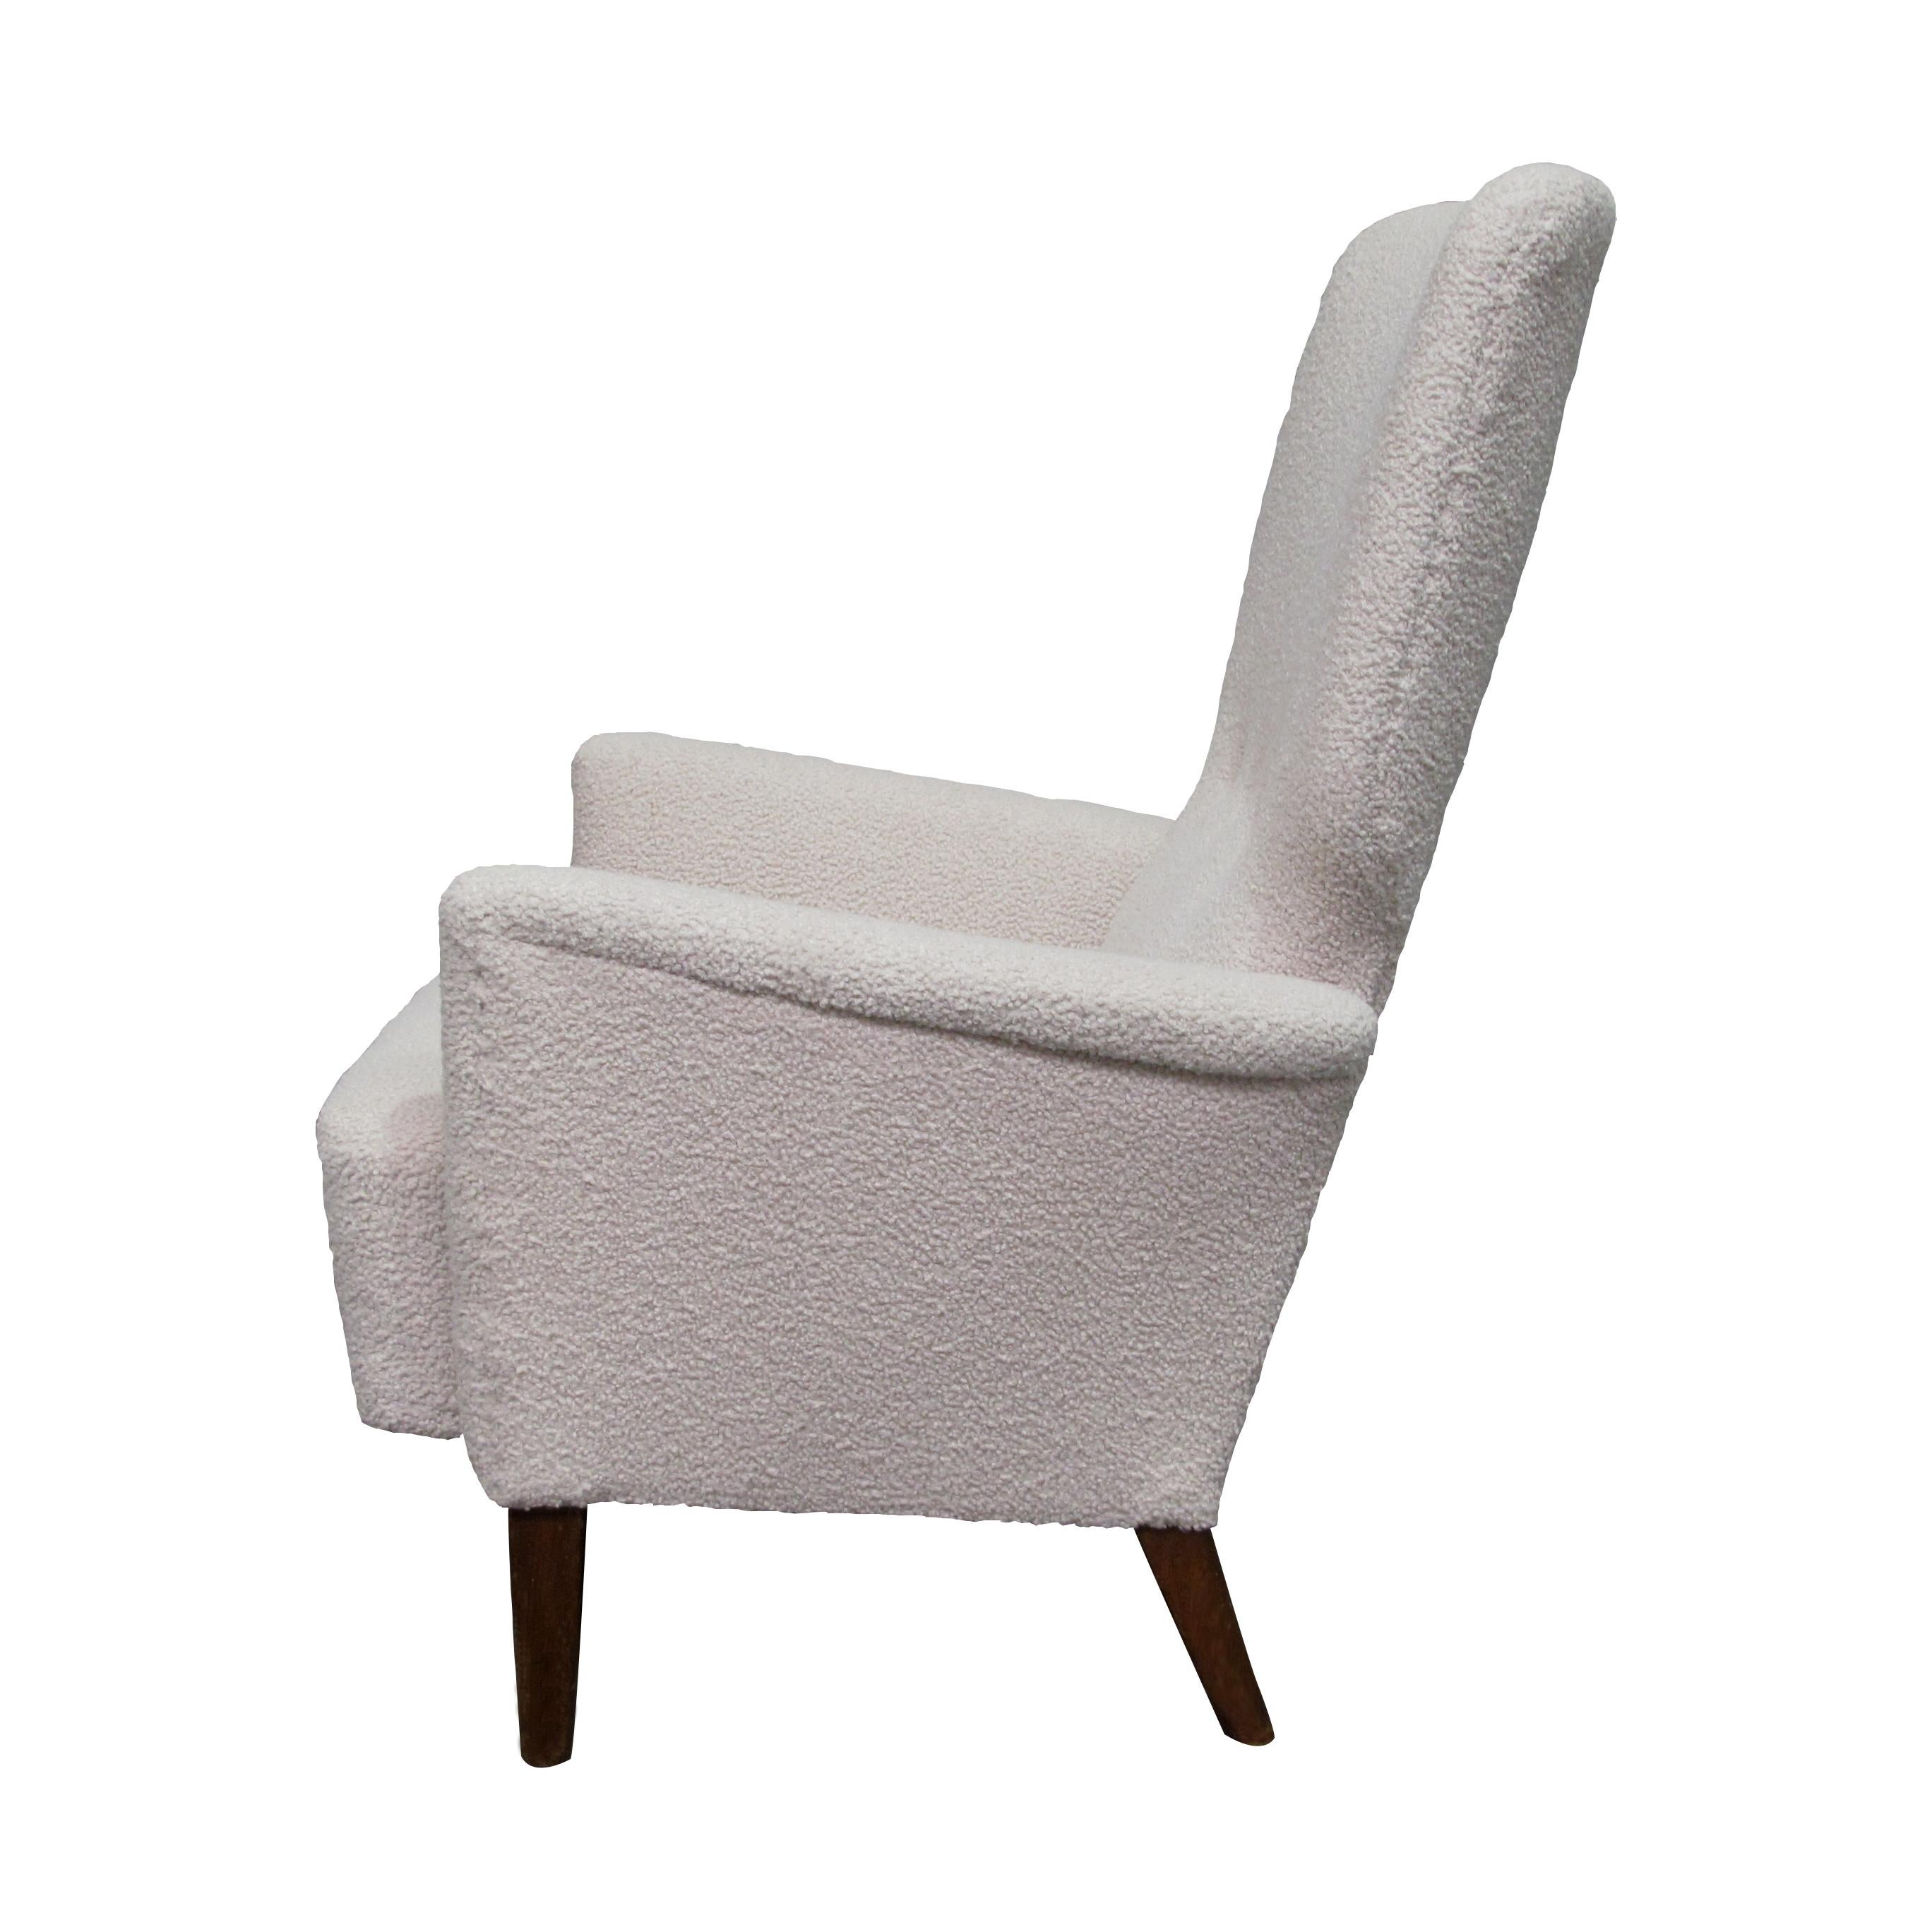 Art Deco 1940s Danish High Back Three Buttoned Lounge Chair in Cream Bouclé Fabric